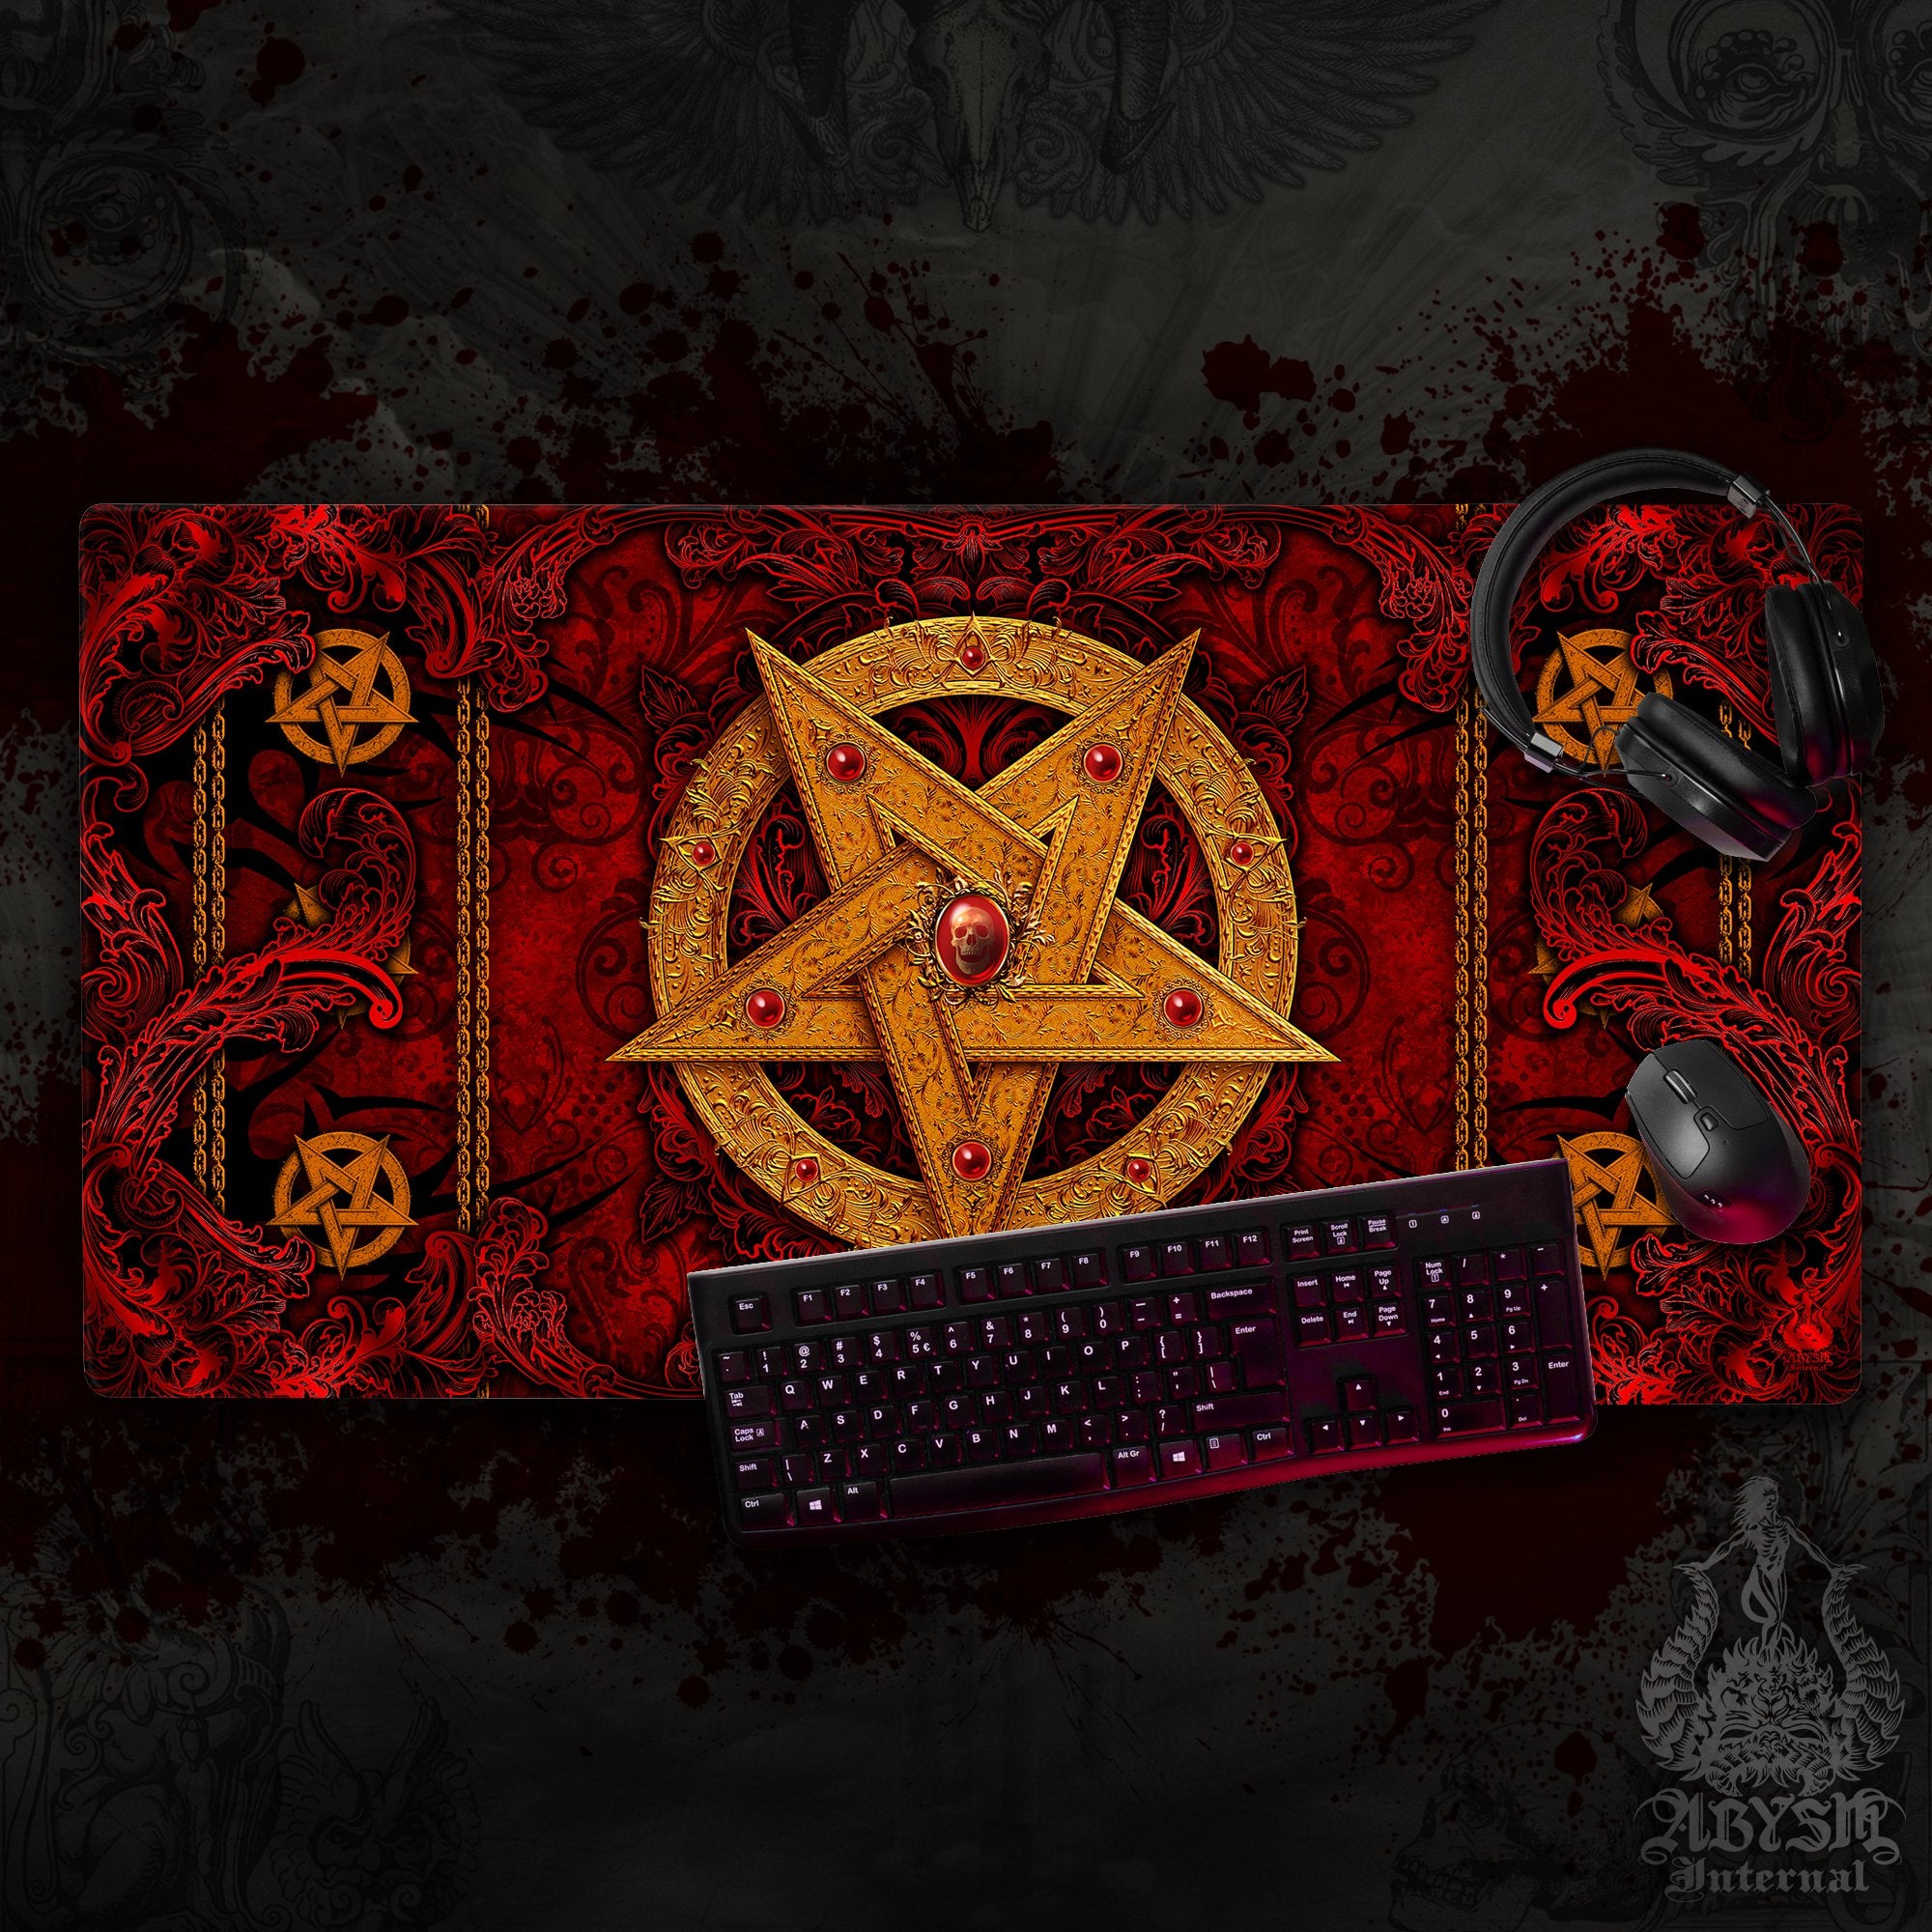 Witch Mouse Pad, Gold Pentagram Gaming Desk Mat, Witch Workpad, Goth Table Protector Cover, Satanic Art Print - 4 Options - Abysm Internal